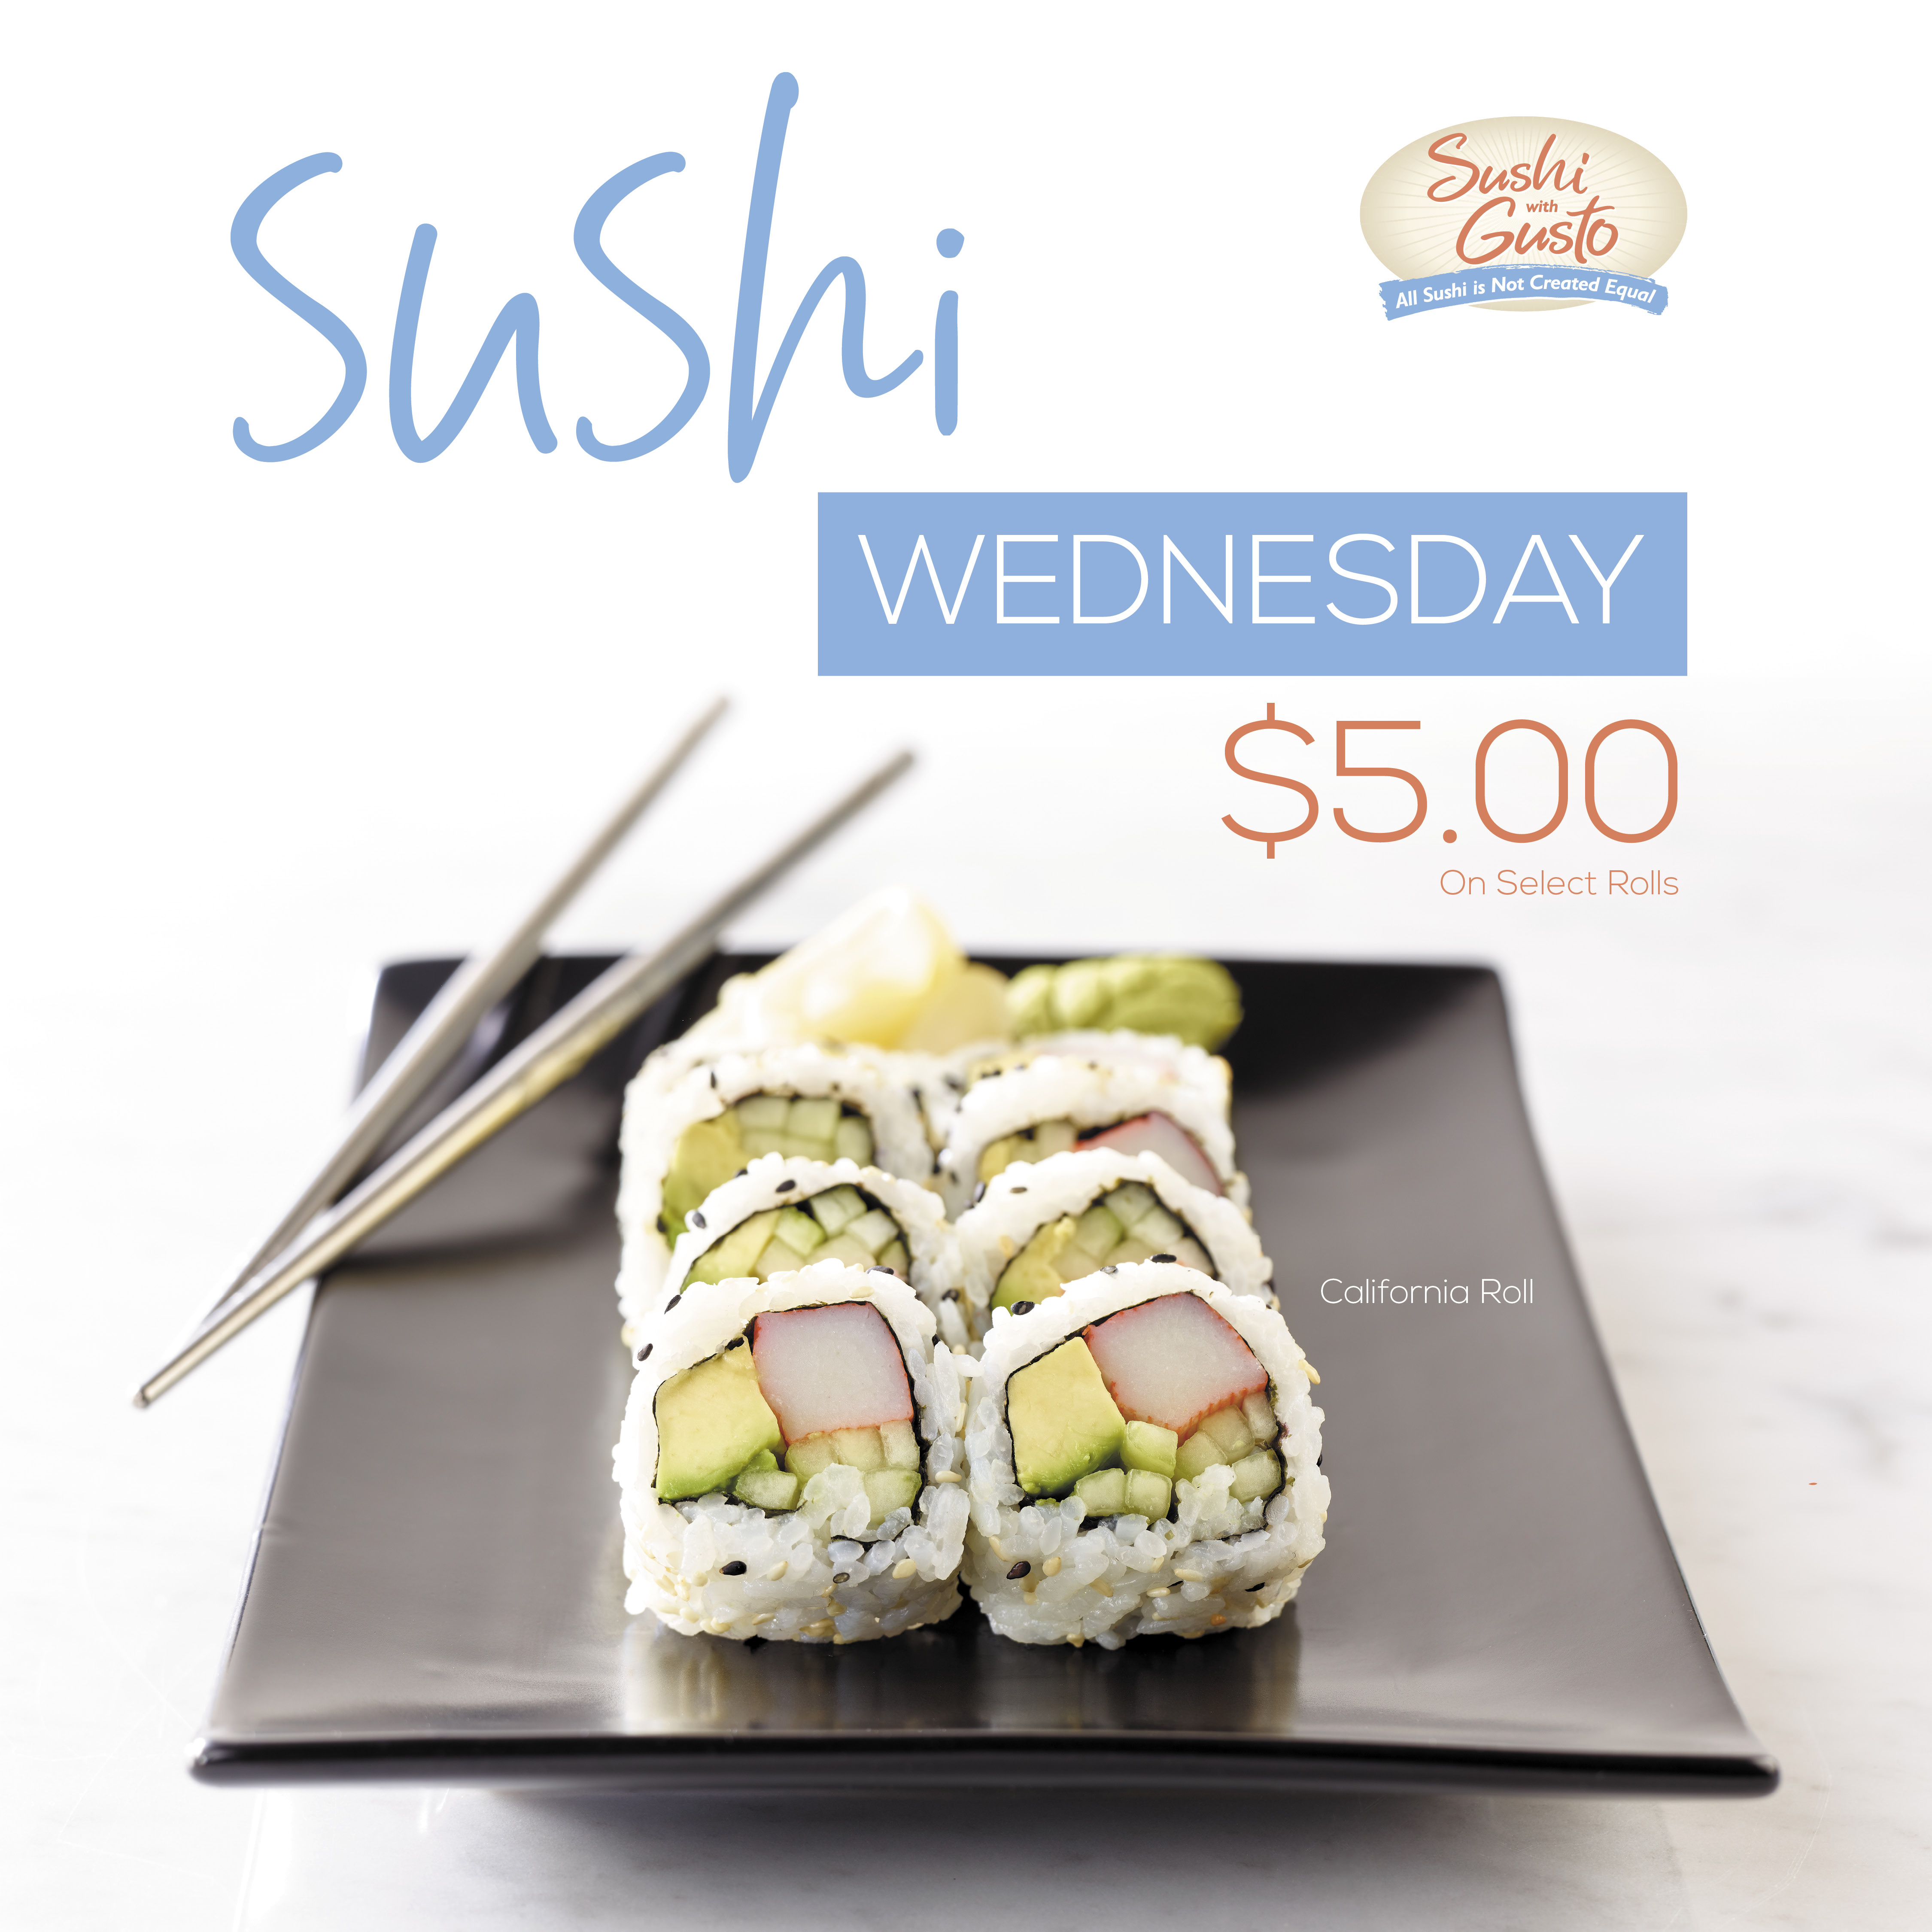 $5 Sushi Wednesday: California Roll, Vegetable Roll, Spicy Cali Crunch, 9 Piece Sampler and Spicy Shrimp Roll